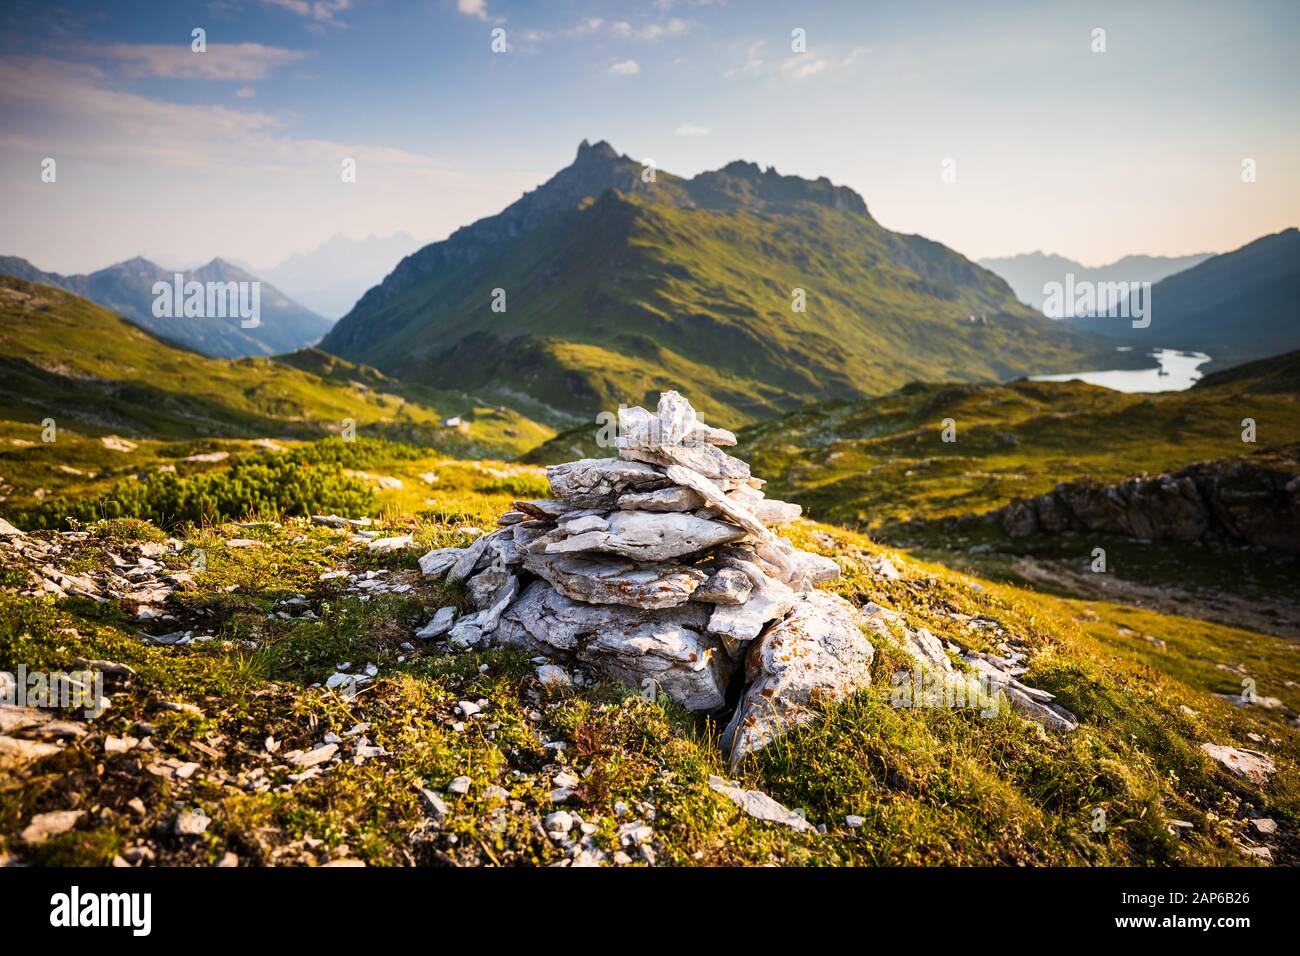 Stone cairn with Giglachsee lake behind, Austria Alps Stock Photo